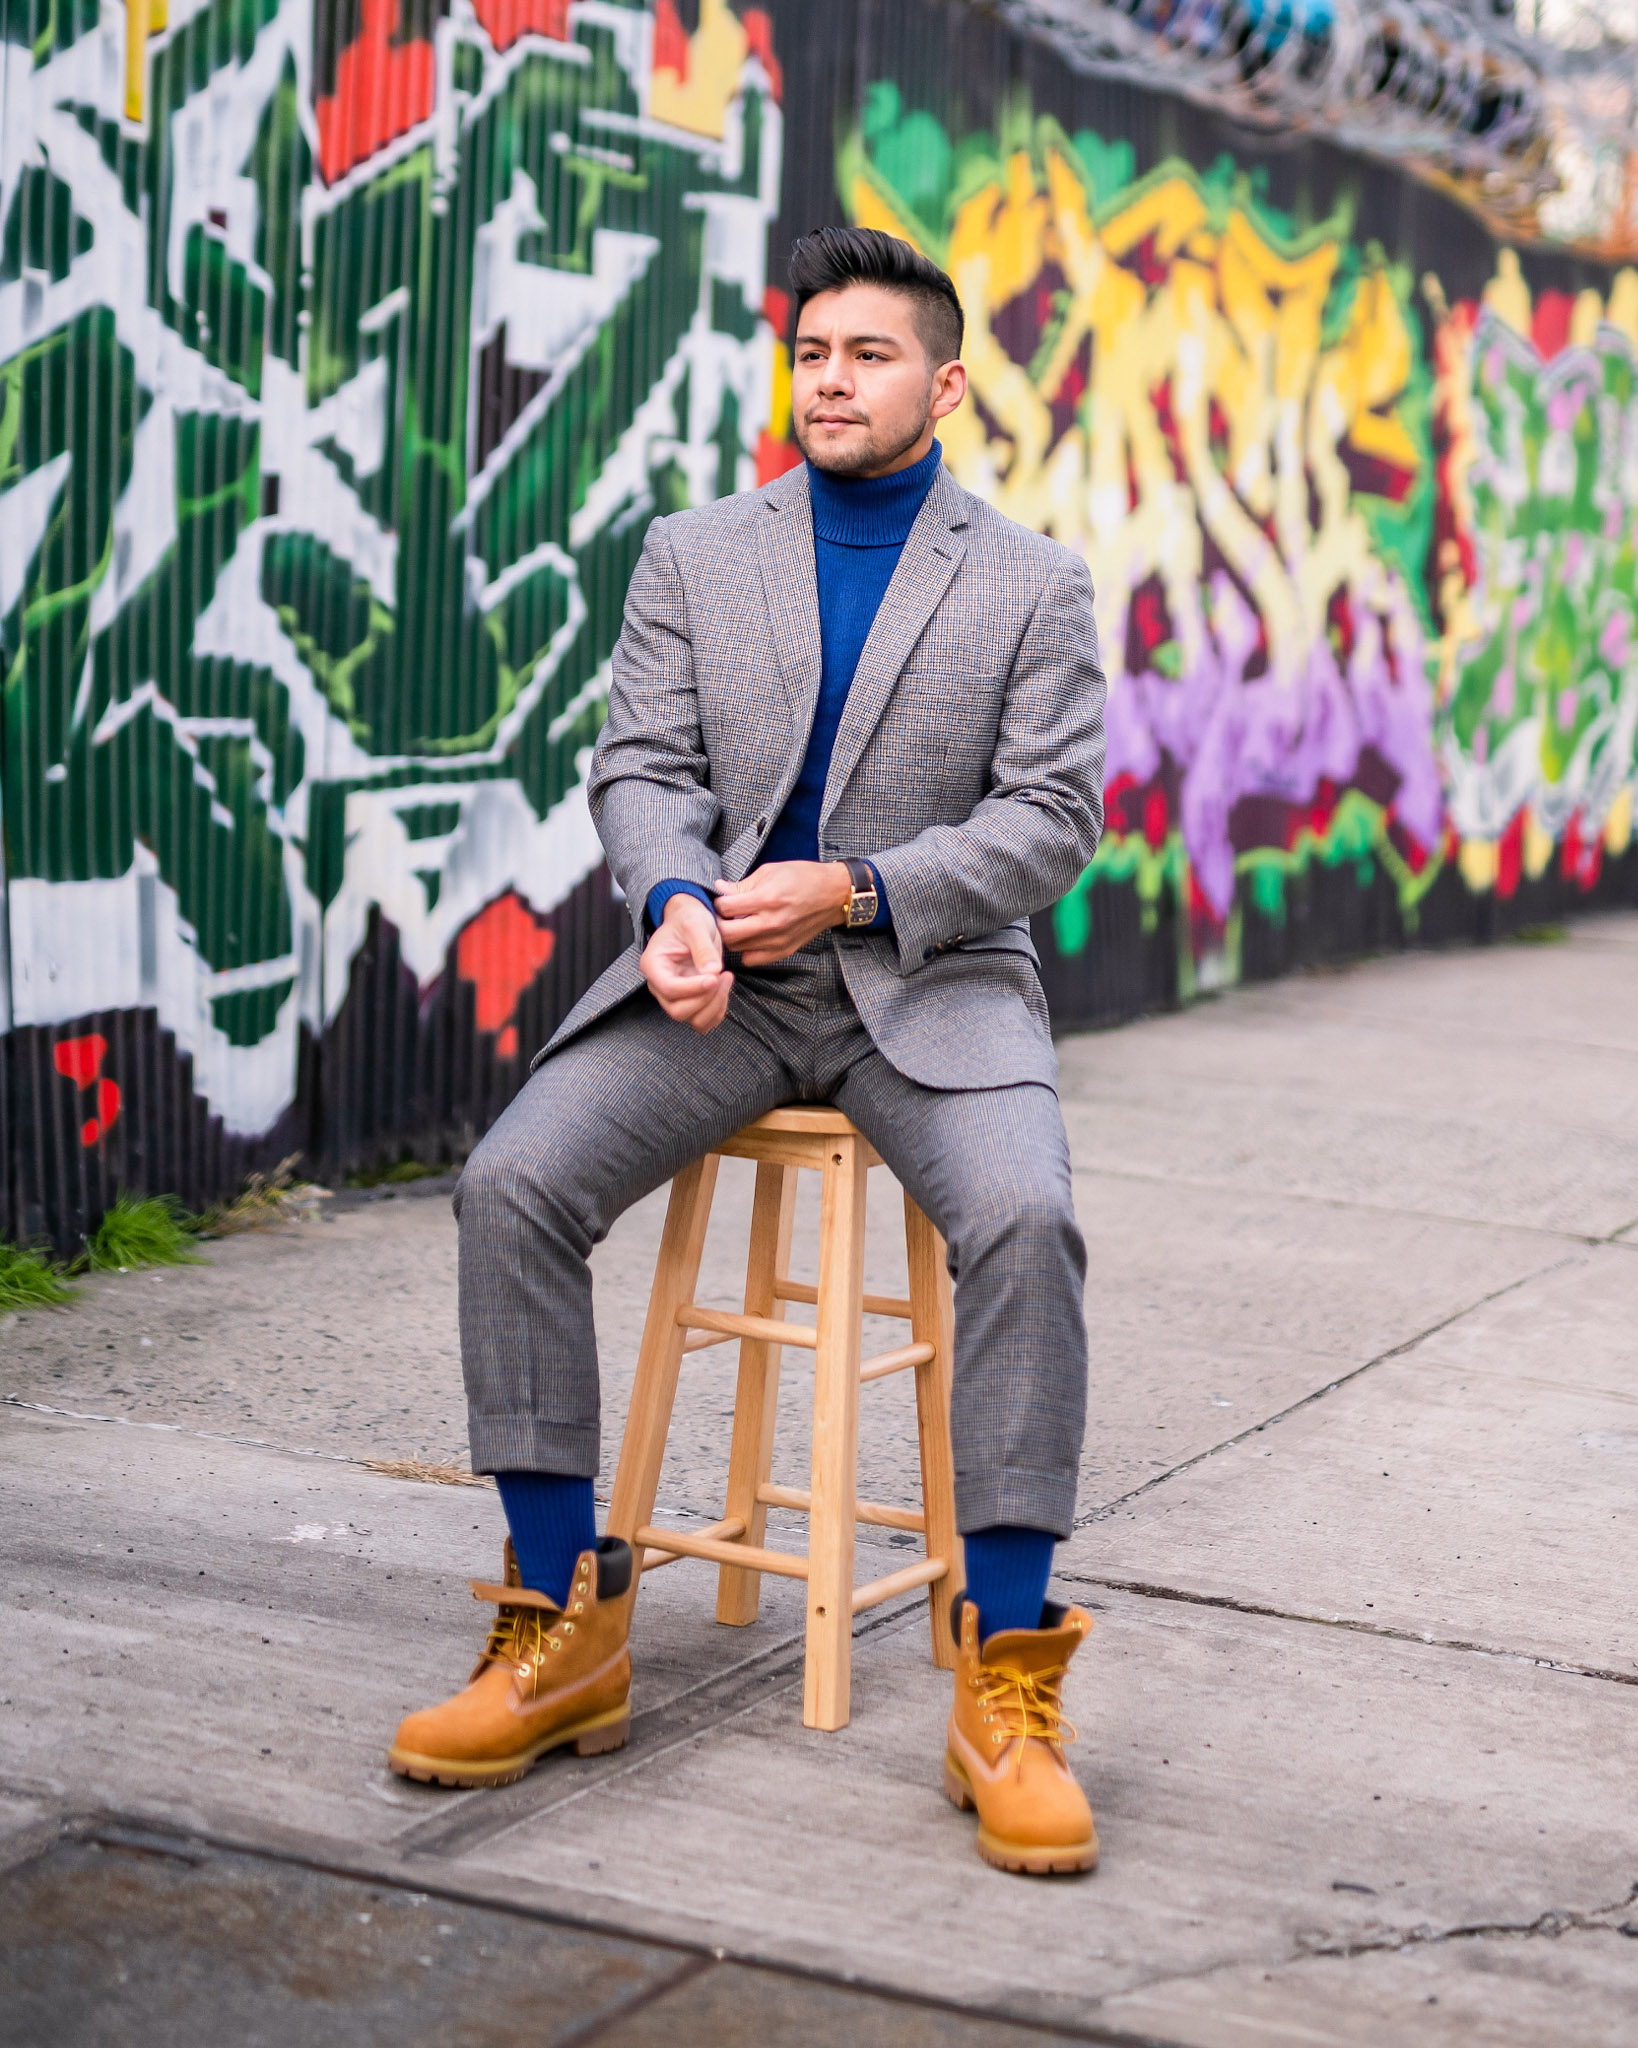 HOW TO PAIR UP YOUR TIMBERLAND BOOTS WITH A SUIT - how to wear timbs with a suit - timberland boots with - boots with suit - classic timberland boots -